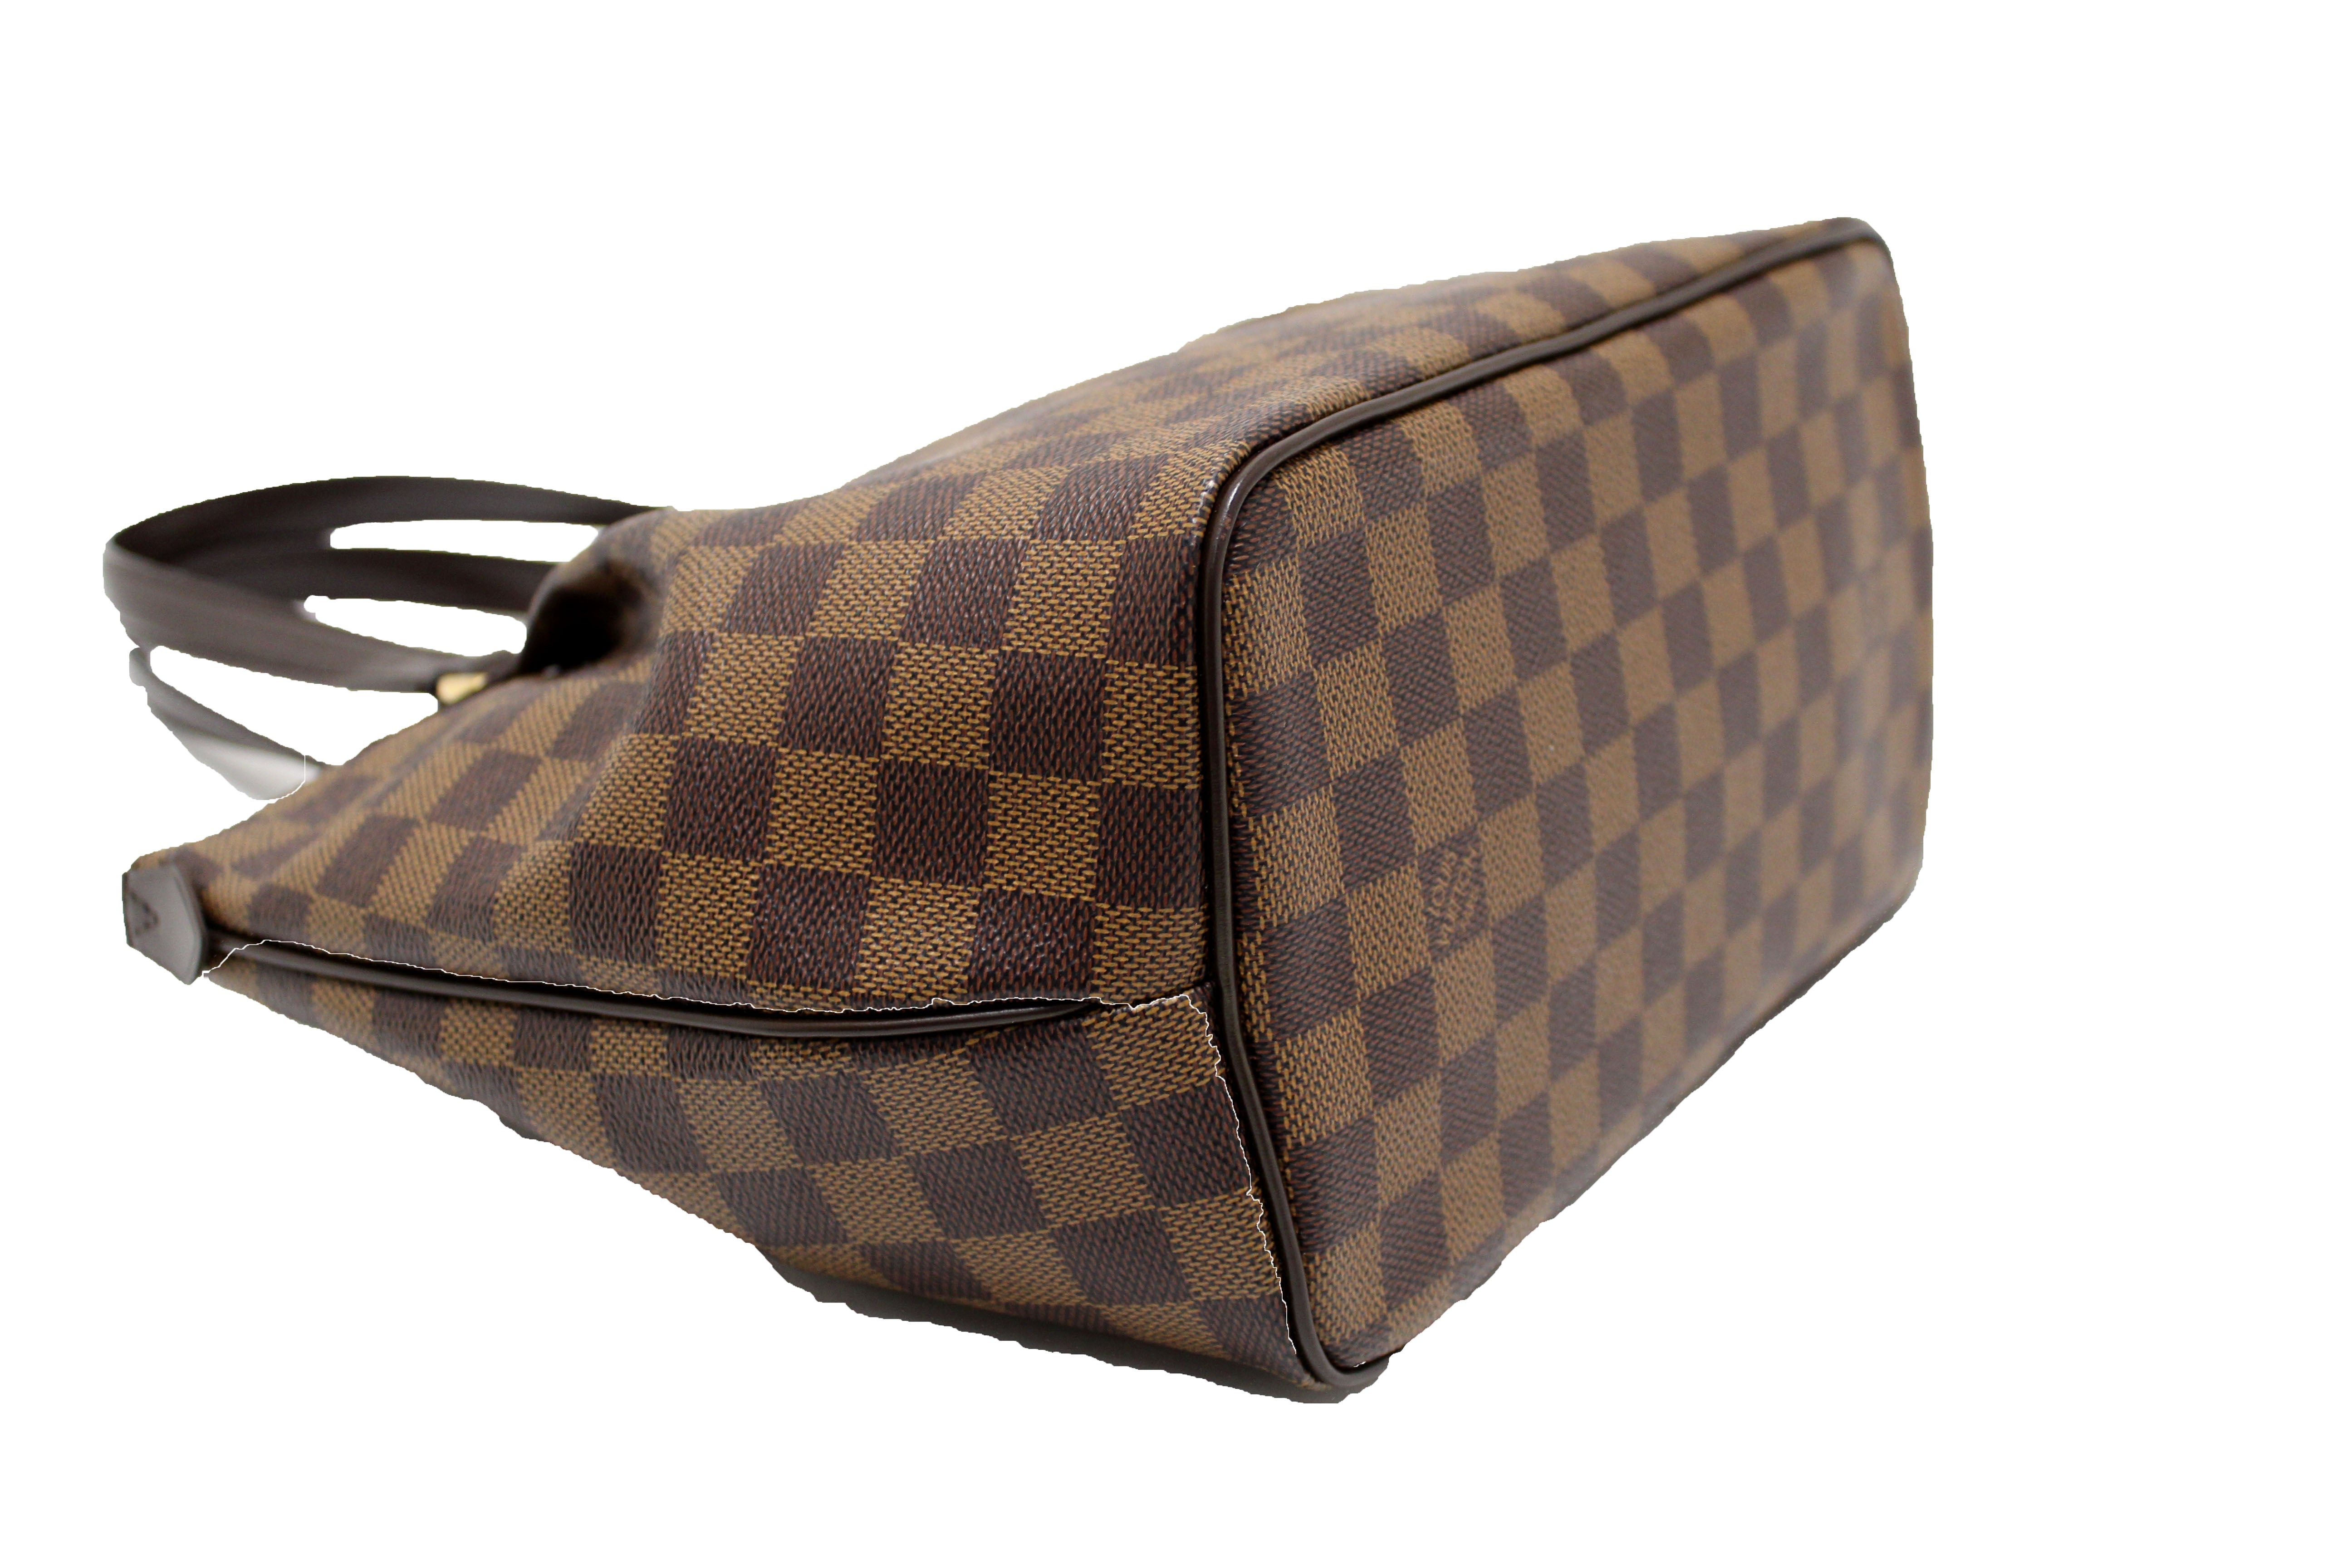 LOUIS VUITTON Damier Ebene Westminster PM Tote Bag N41102 LV Auth